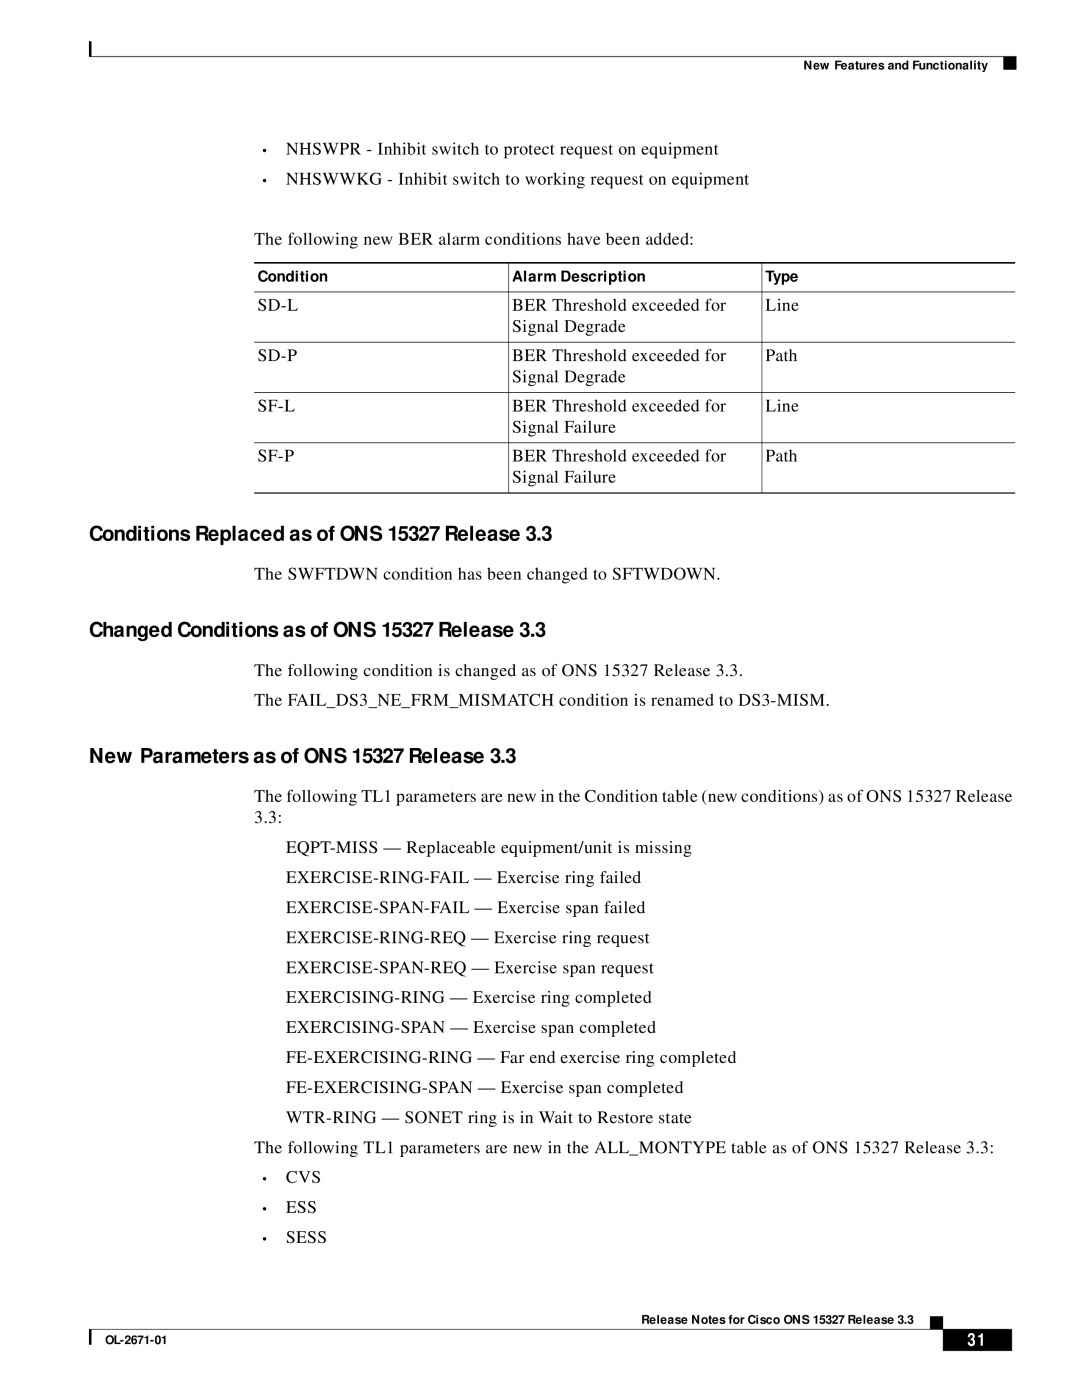 Cisco Systems manual Conditions Replaced as of ONS 15327 Release, Changed Conditions as of ONS 15327 Release, Type 